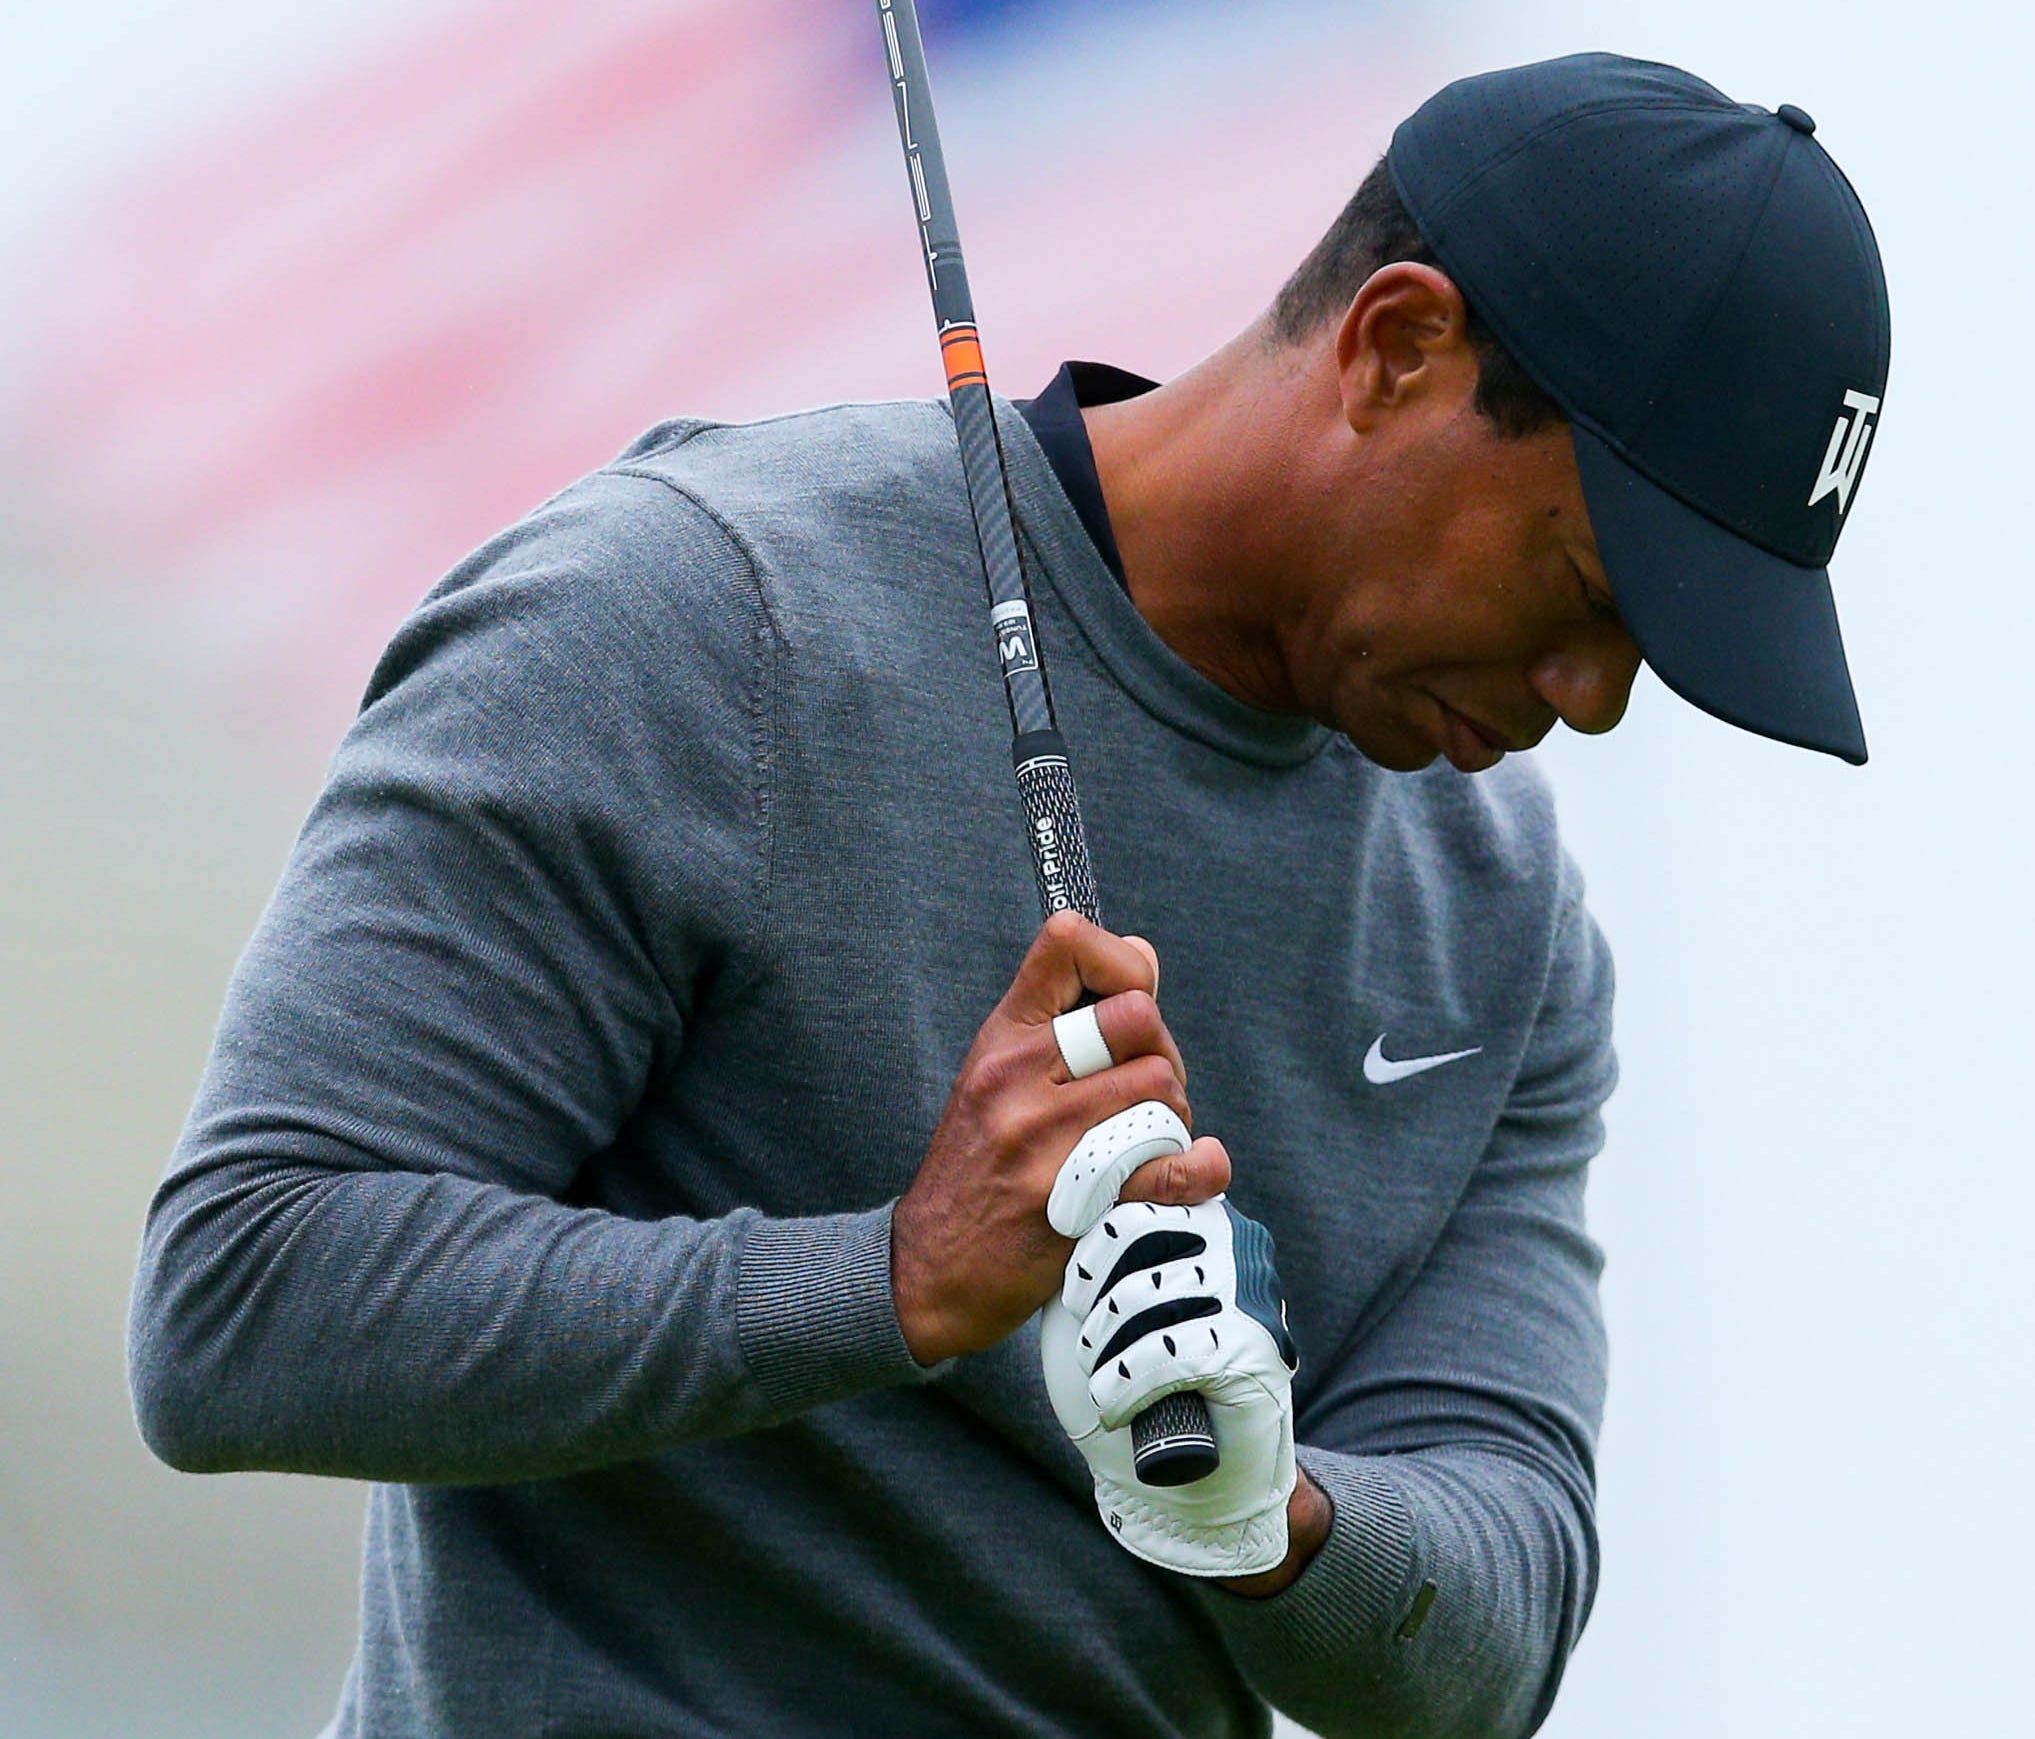 Tiger Woods reacts after he tees off the fourteenth hole during the second round of the U.S. Open golf tournament at Shinnecock Hills.